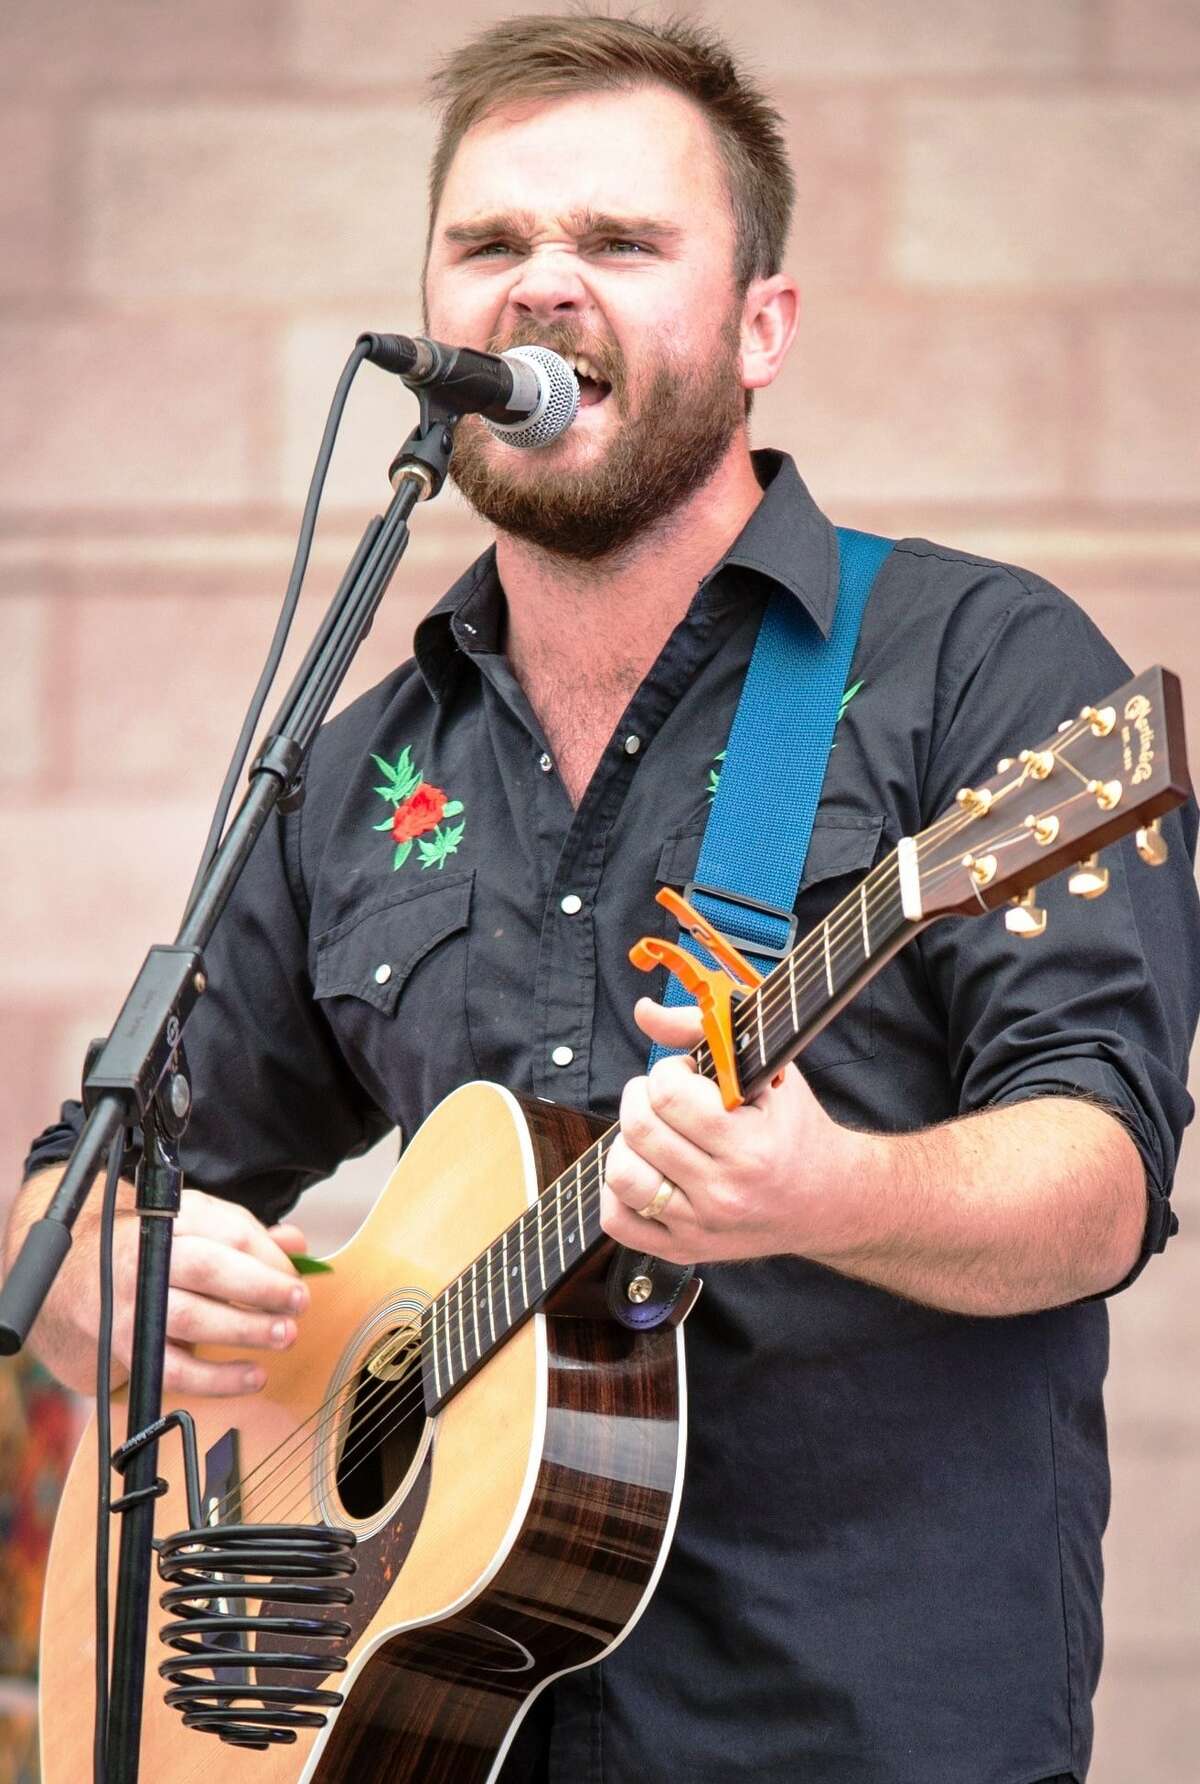 The San Antonio native and 2006 graduate of Churchill High School will celebrate the release of his second full-length album, “Proving Grounds.” Now calling Austin home, Baumann worked with top-shelf artists in the studio, including Cody Braun of Reckless Kelly on mandolin, fiddle and harmonica and Wes Hightower, a past member of George Strait’s Ace in the Hole Band, on background vocals. “Proving Grounds’ ” debut radio single, “The Trouble with Drinkin’,” is in the Top 30 on the Texas Regional Radio Report after nine weeks.  “Old Stone Church” is an emotional tale about the loss of his father, Bill Baumann, who died in 2013. The album is dedicated to him. 9 p.m. Friday. John T. Floore Country Store, 14492 Old Bandera Road, Helotes. $10 advance; $12 at the door. (Minors $5 more at the door.) 210-695-8827; liveatfloores.com -- John Goodspeed